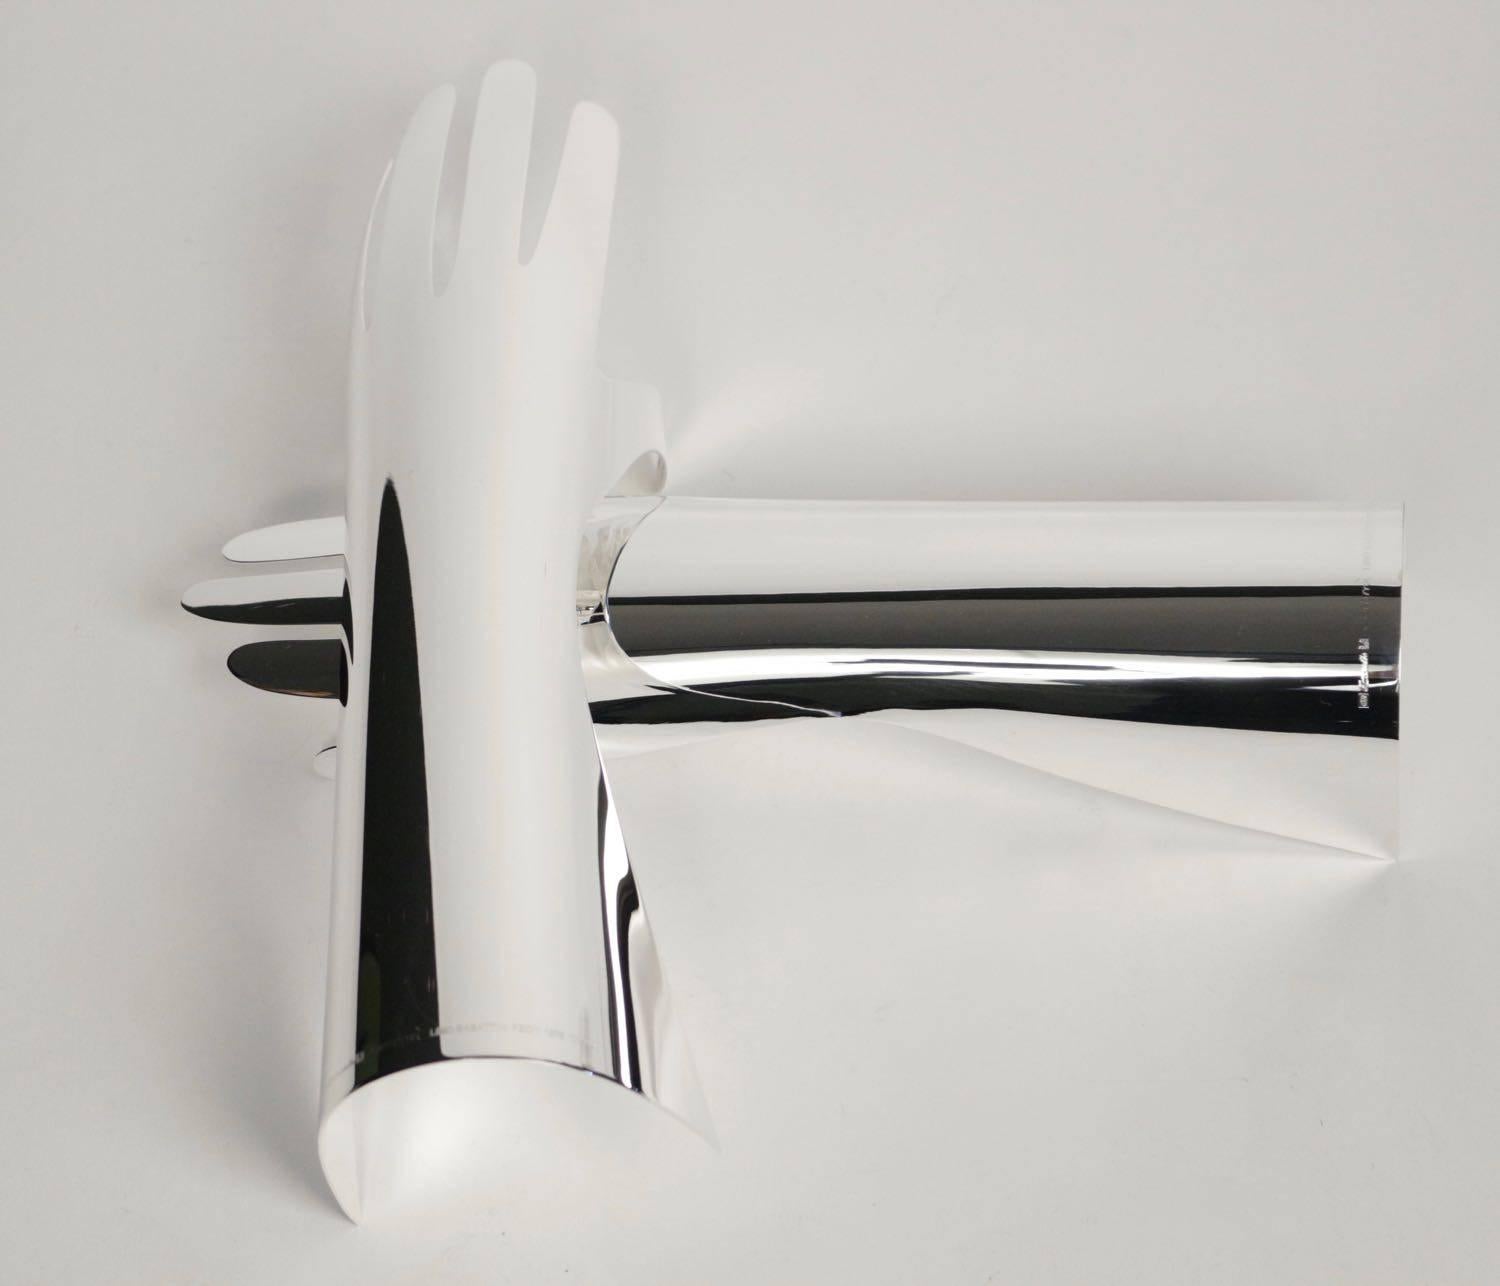 The Mani by Gio Ponti for Lino Sabatini, 1978.
Designed in collaboration of two Italian designers Gio Ponti architecte and et designer and Lino Sabattini designer and editor for Maison Christophe.
Two concave shape hands in silver metal, a right